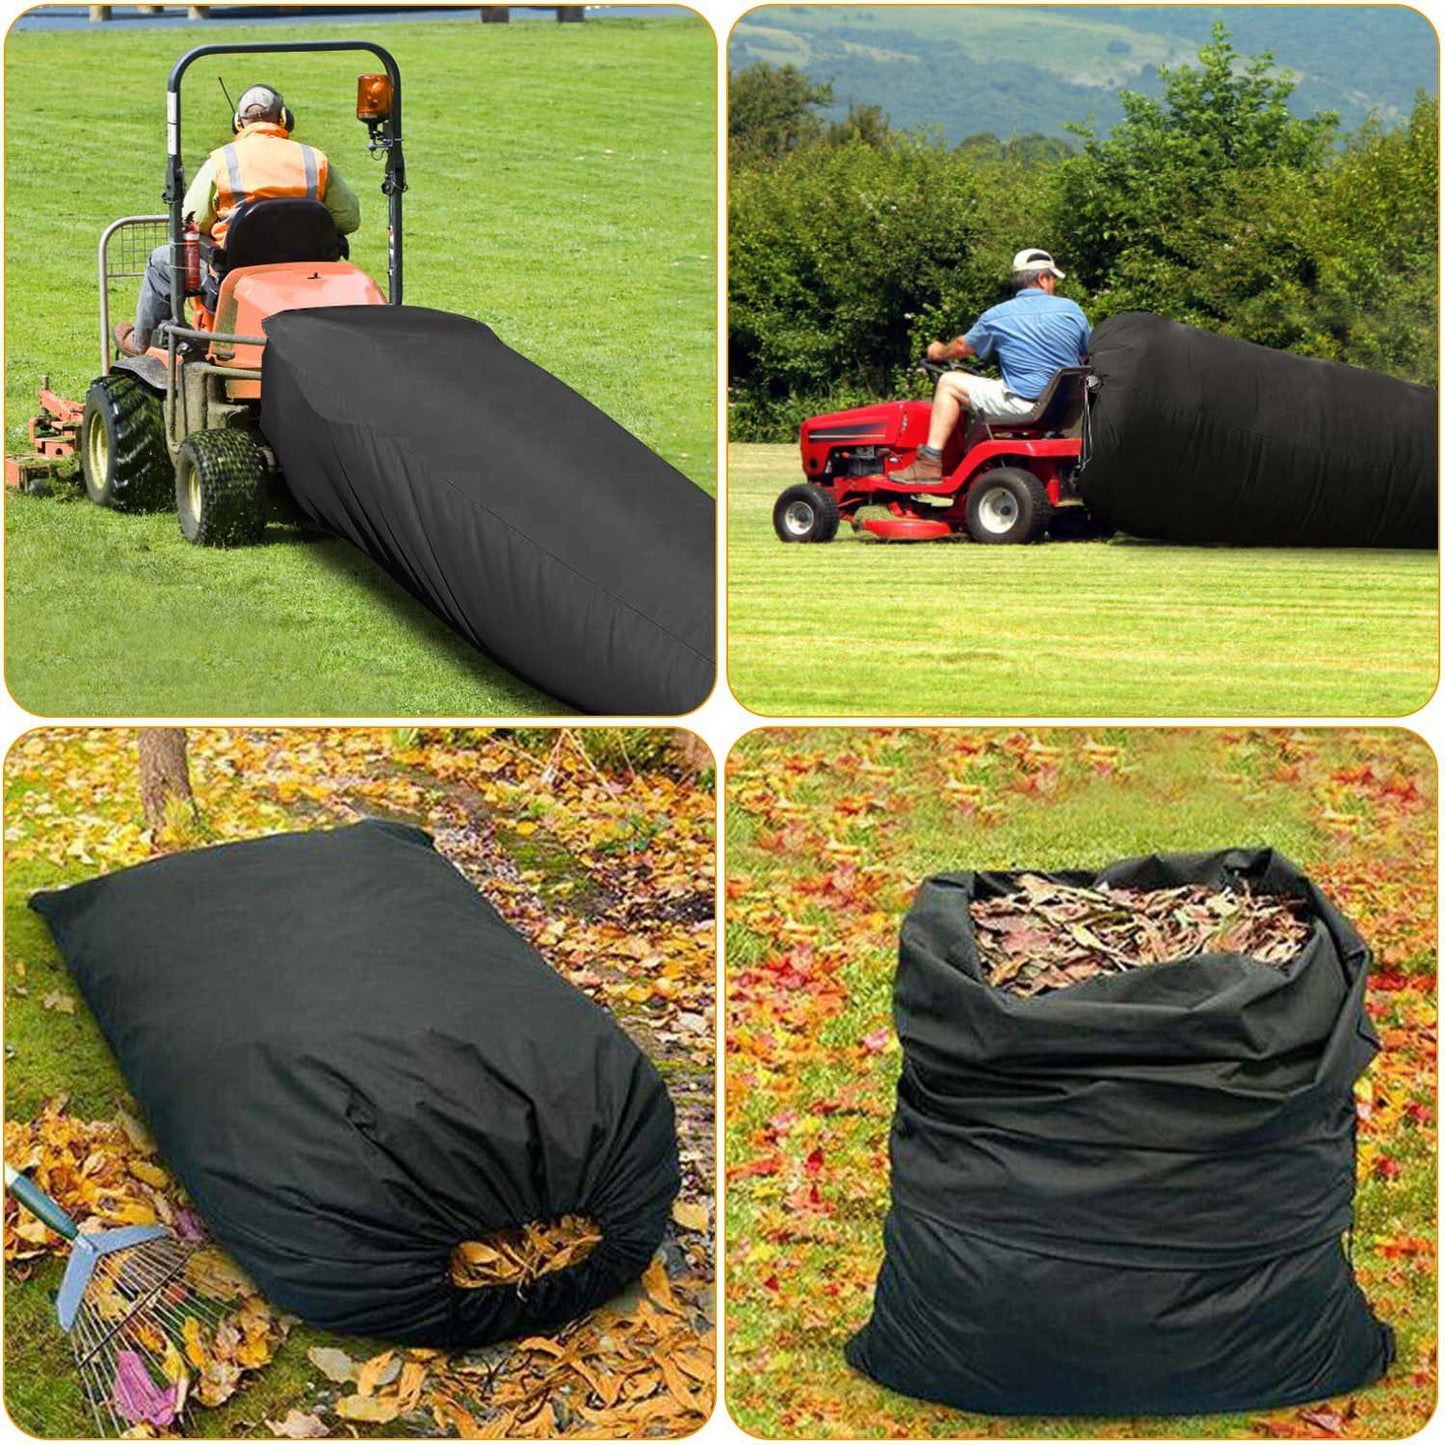 Lawn Tractor Leaf Bag 54 Cubic Feet Standard Garden Waste Collection Bag with 112in Opening